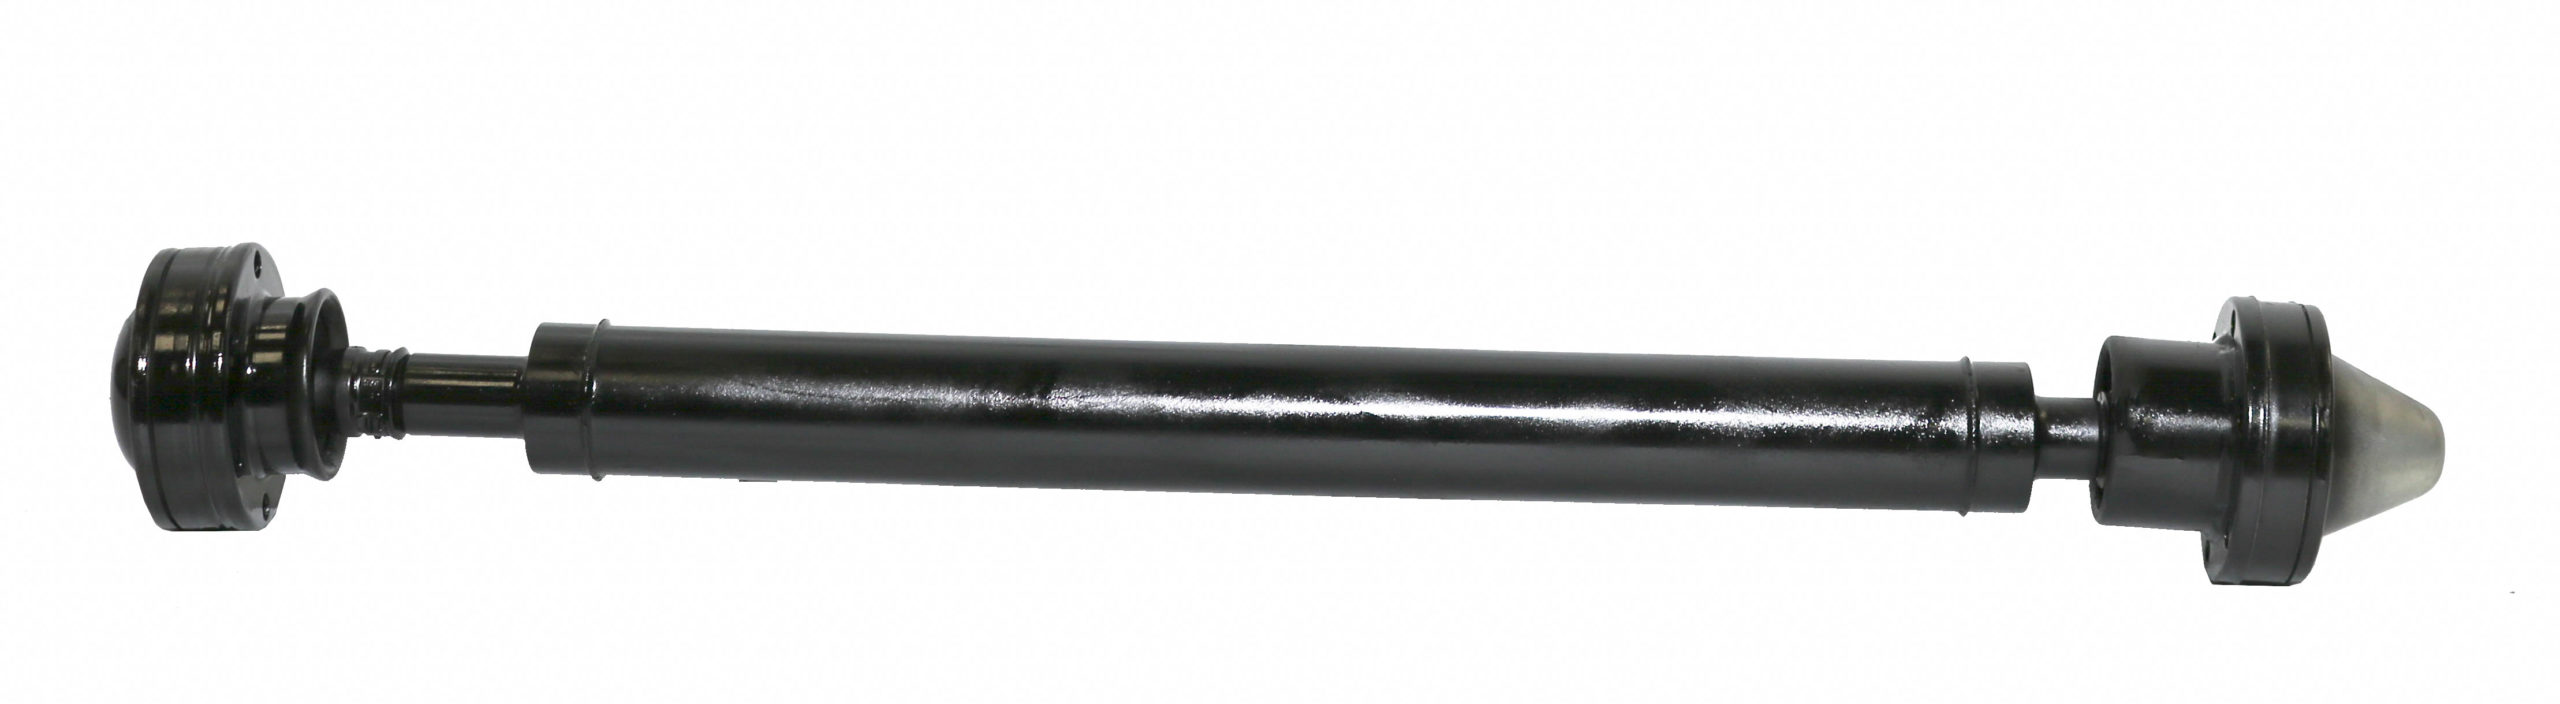 Front driveshaft for 2008 to 2014 Cadillac CTS.